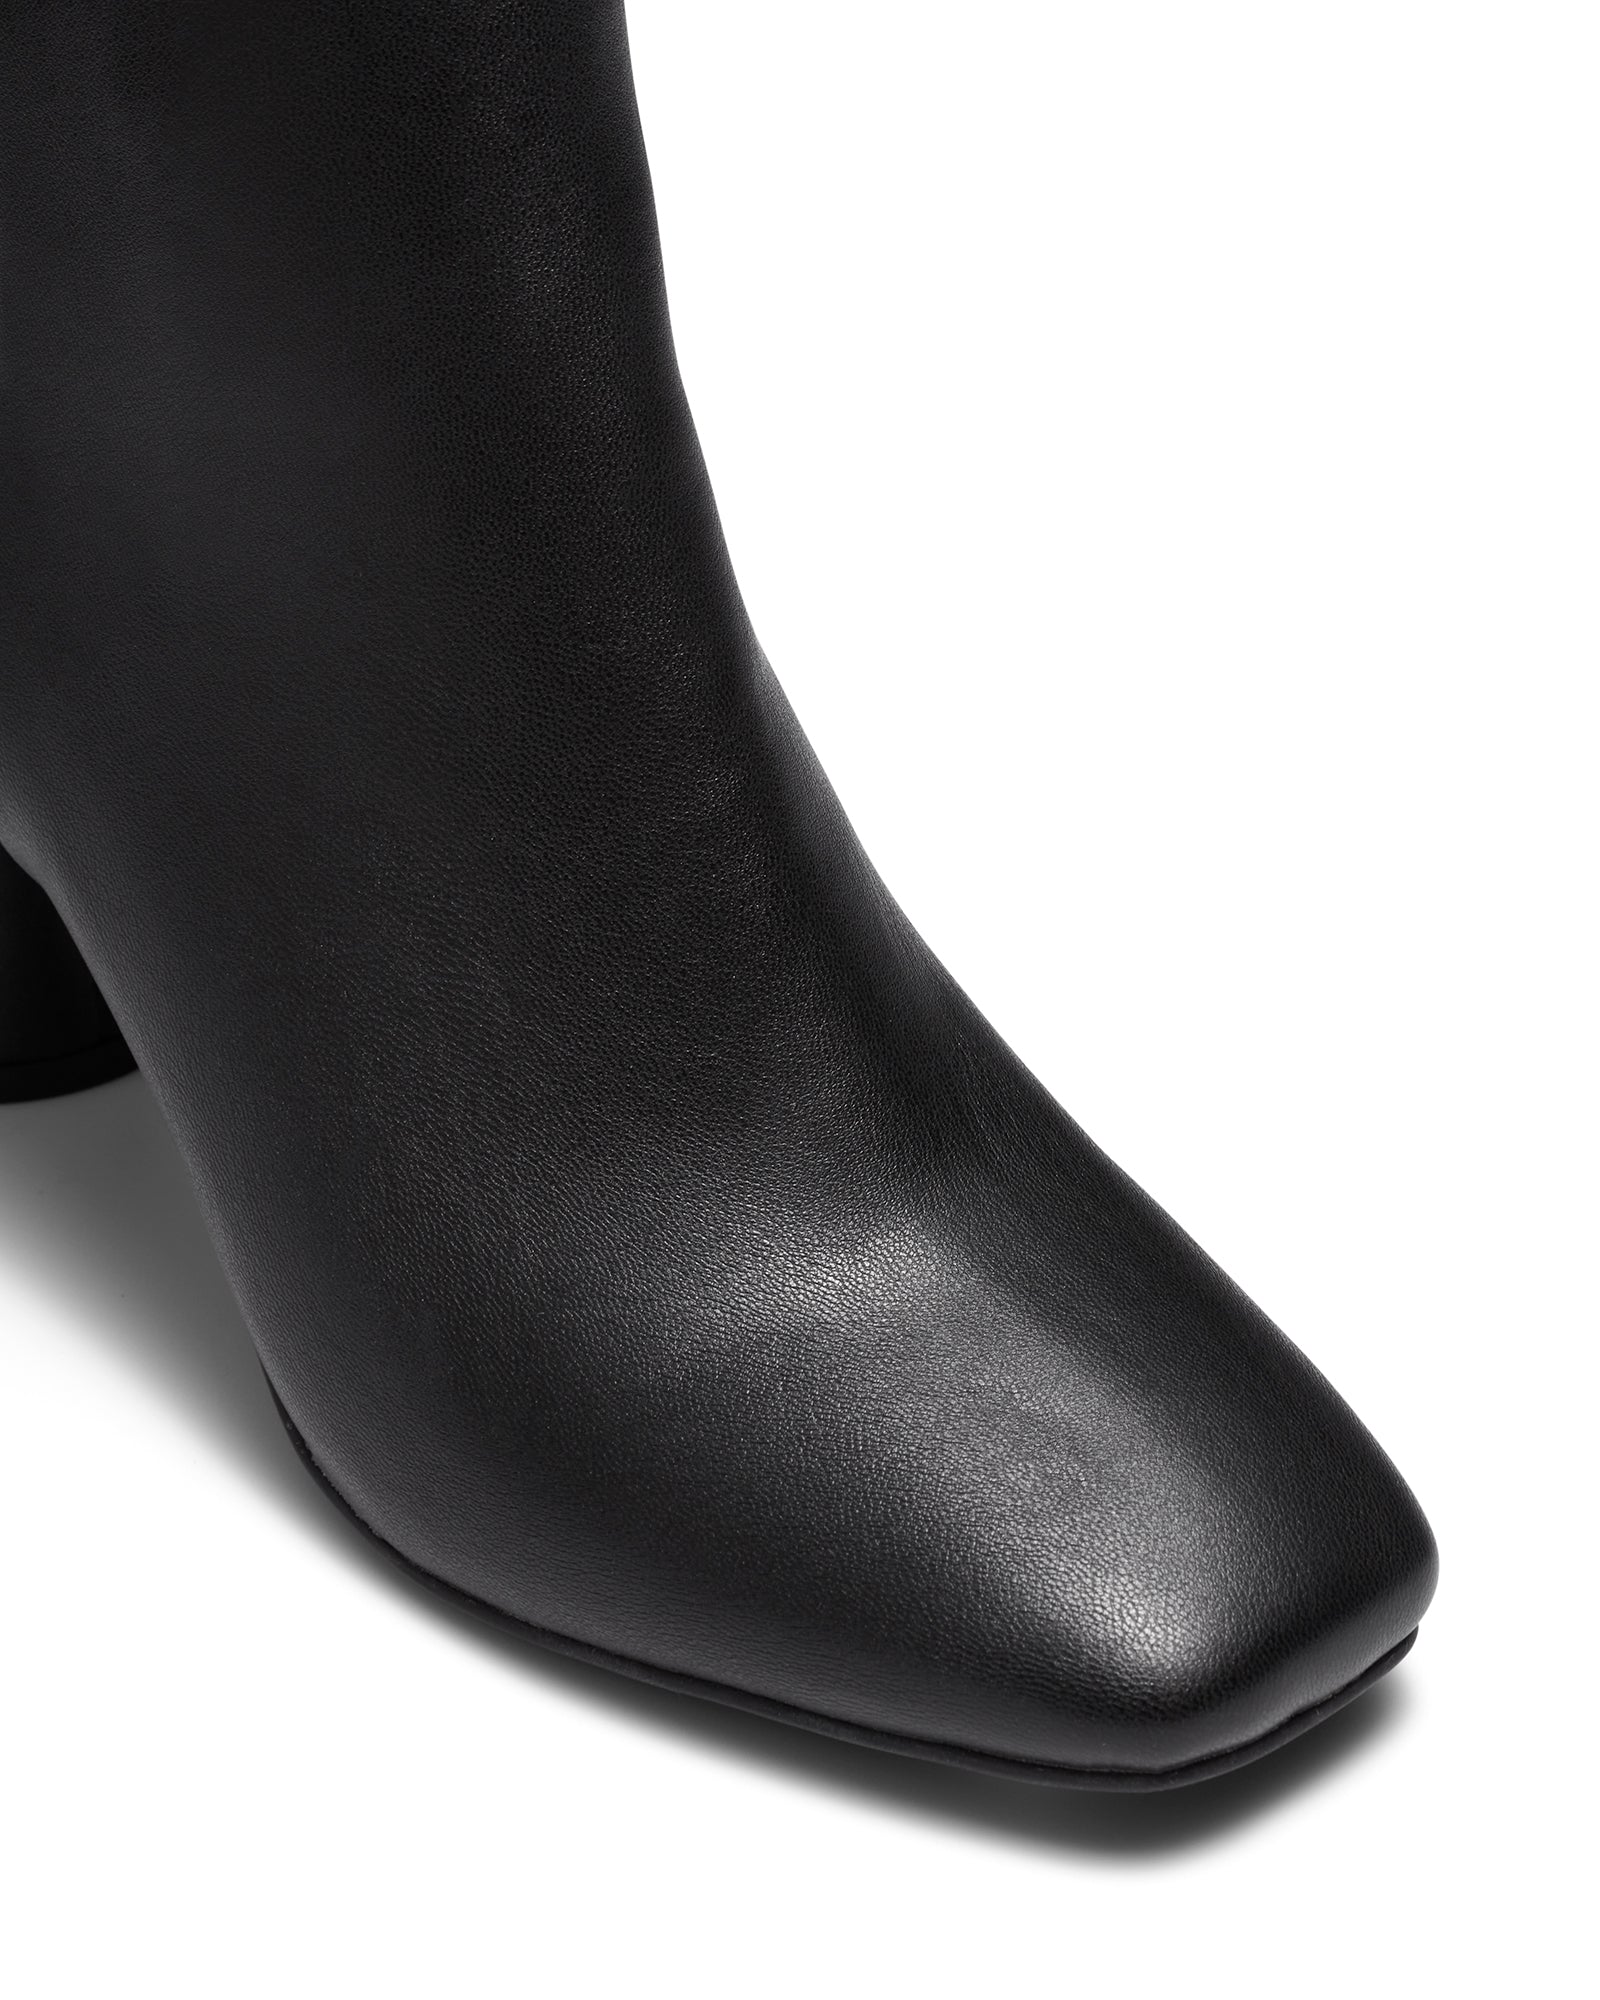 Therapy Shoes Katia Black | Women's Boots | Ankle | Dress | Mid Heel